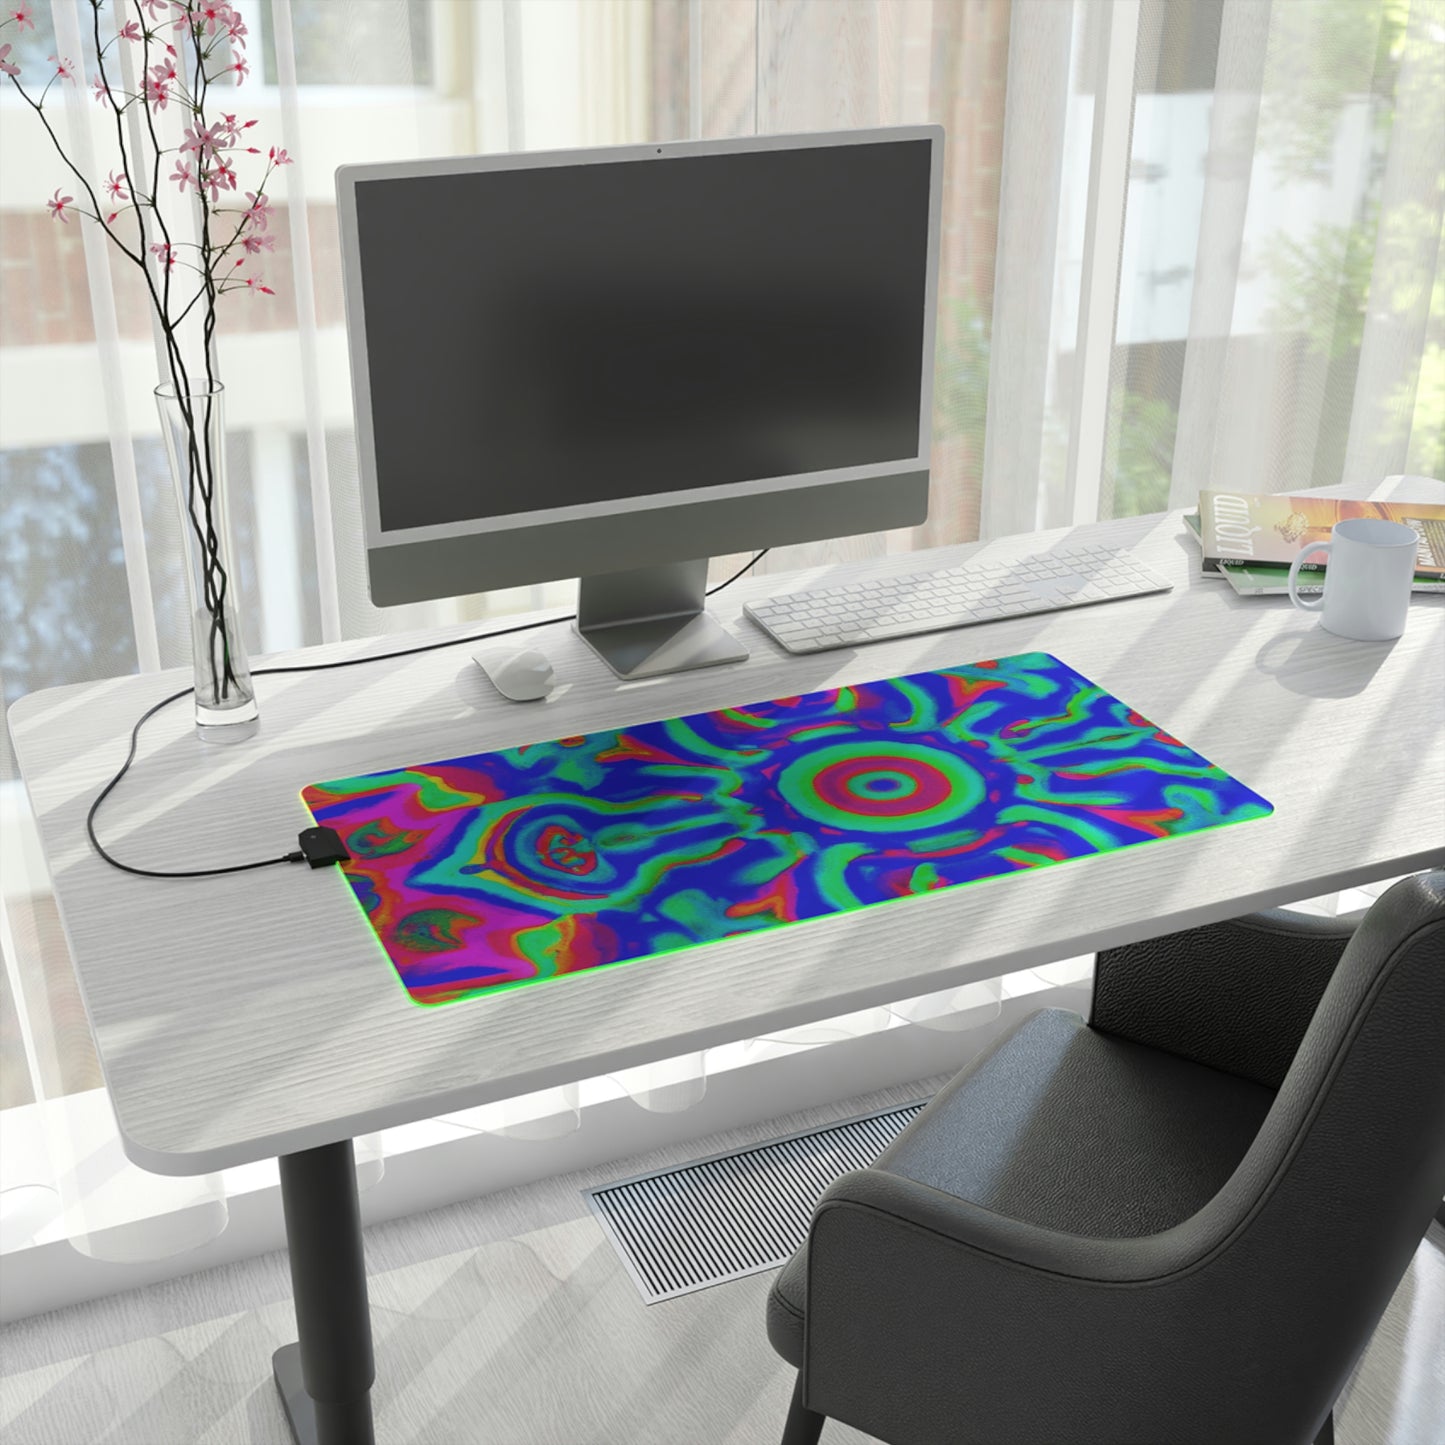 Rocky Polka - Psychedelic Trippy LED Light Up Gaming Mouse Pad